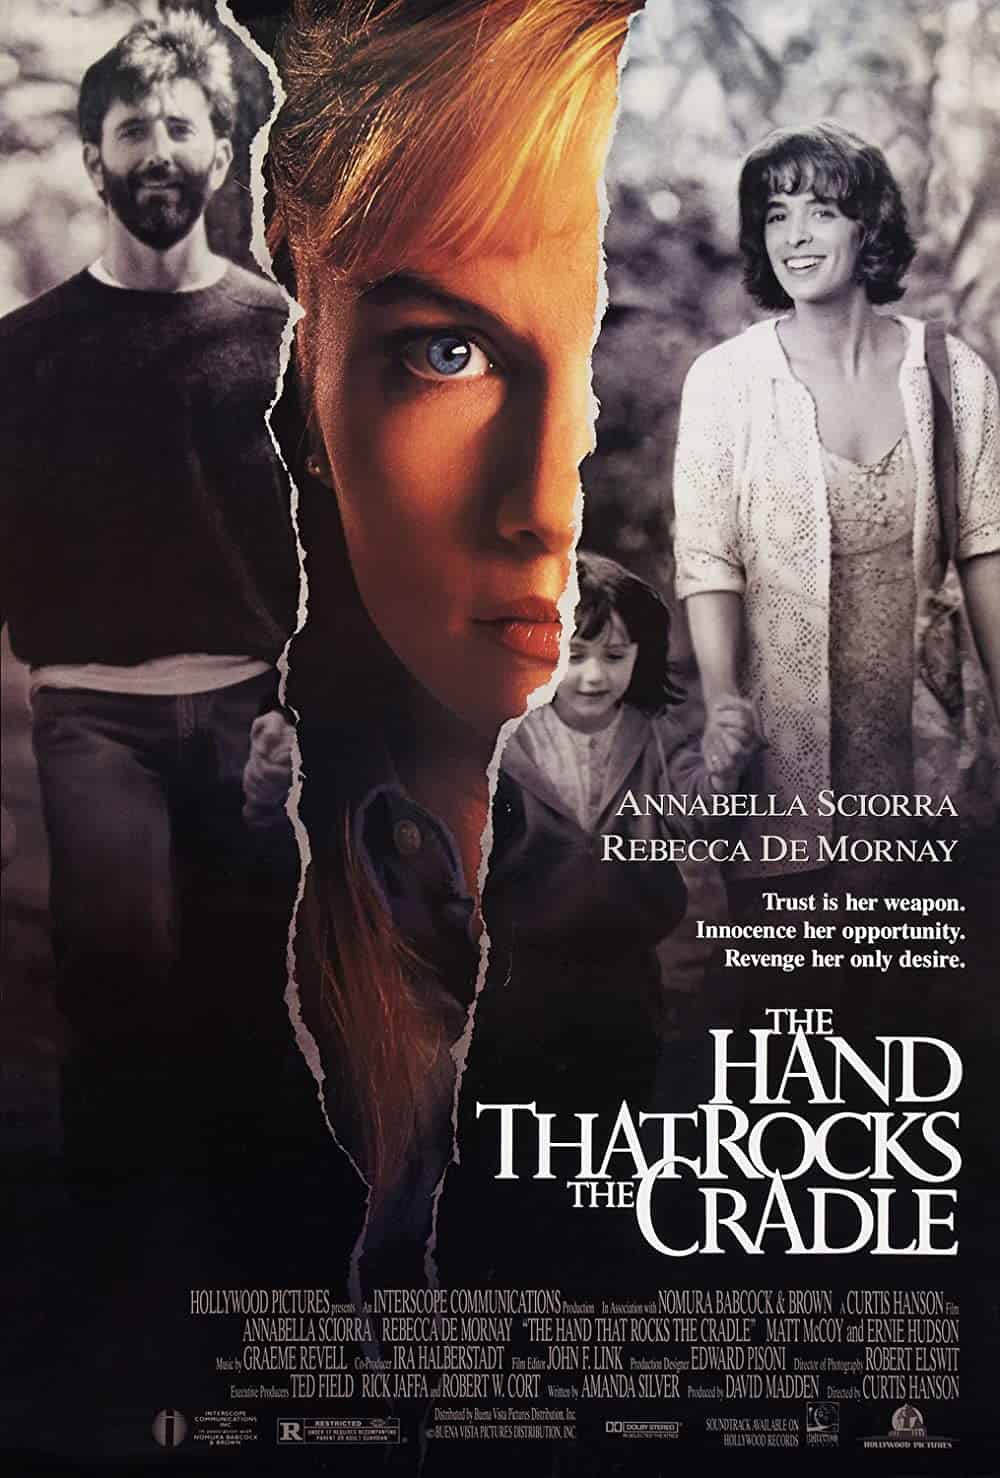 The Hand That Rocks The Cradle (1992) 14 Best Stalker Movies